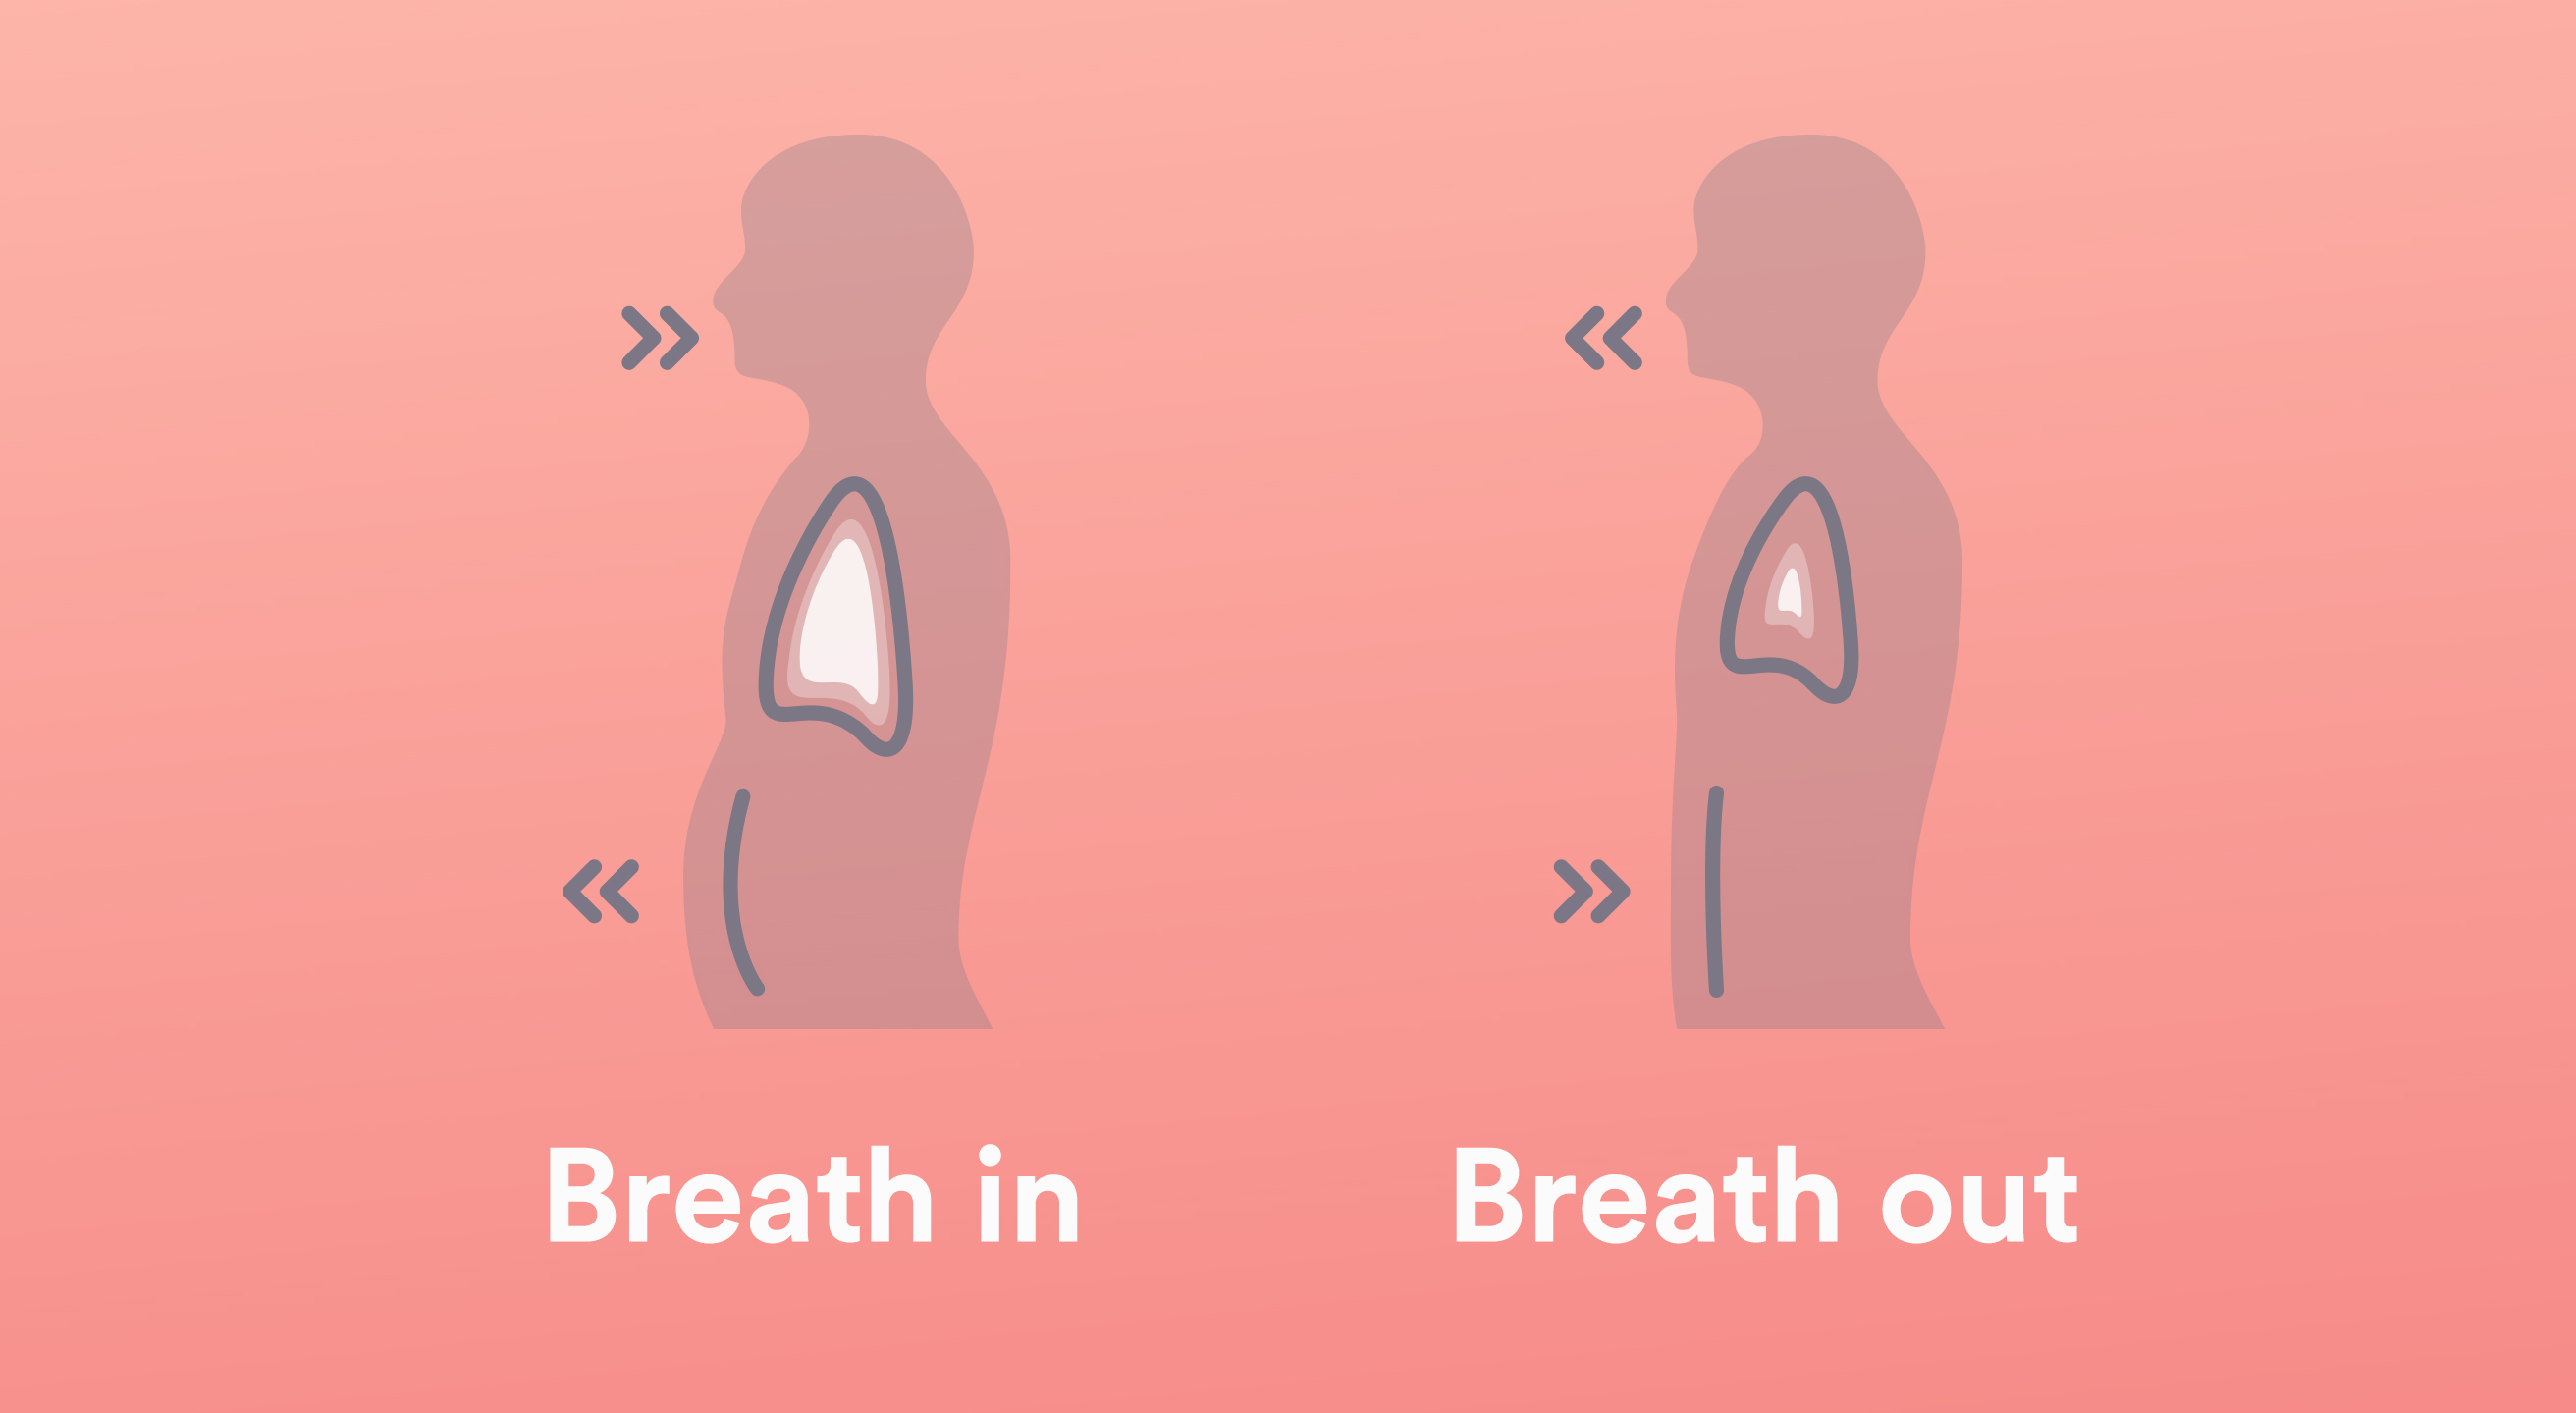 Did you know that breathing... - Allergy & Asthma Network | Facebook